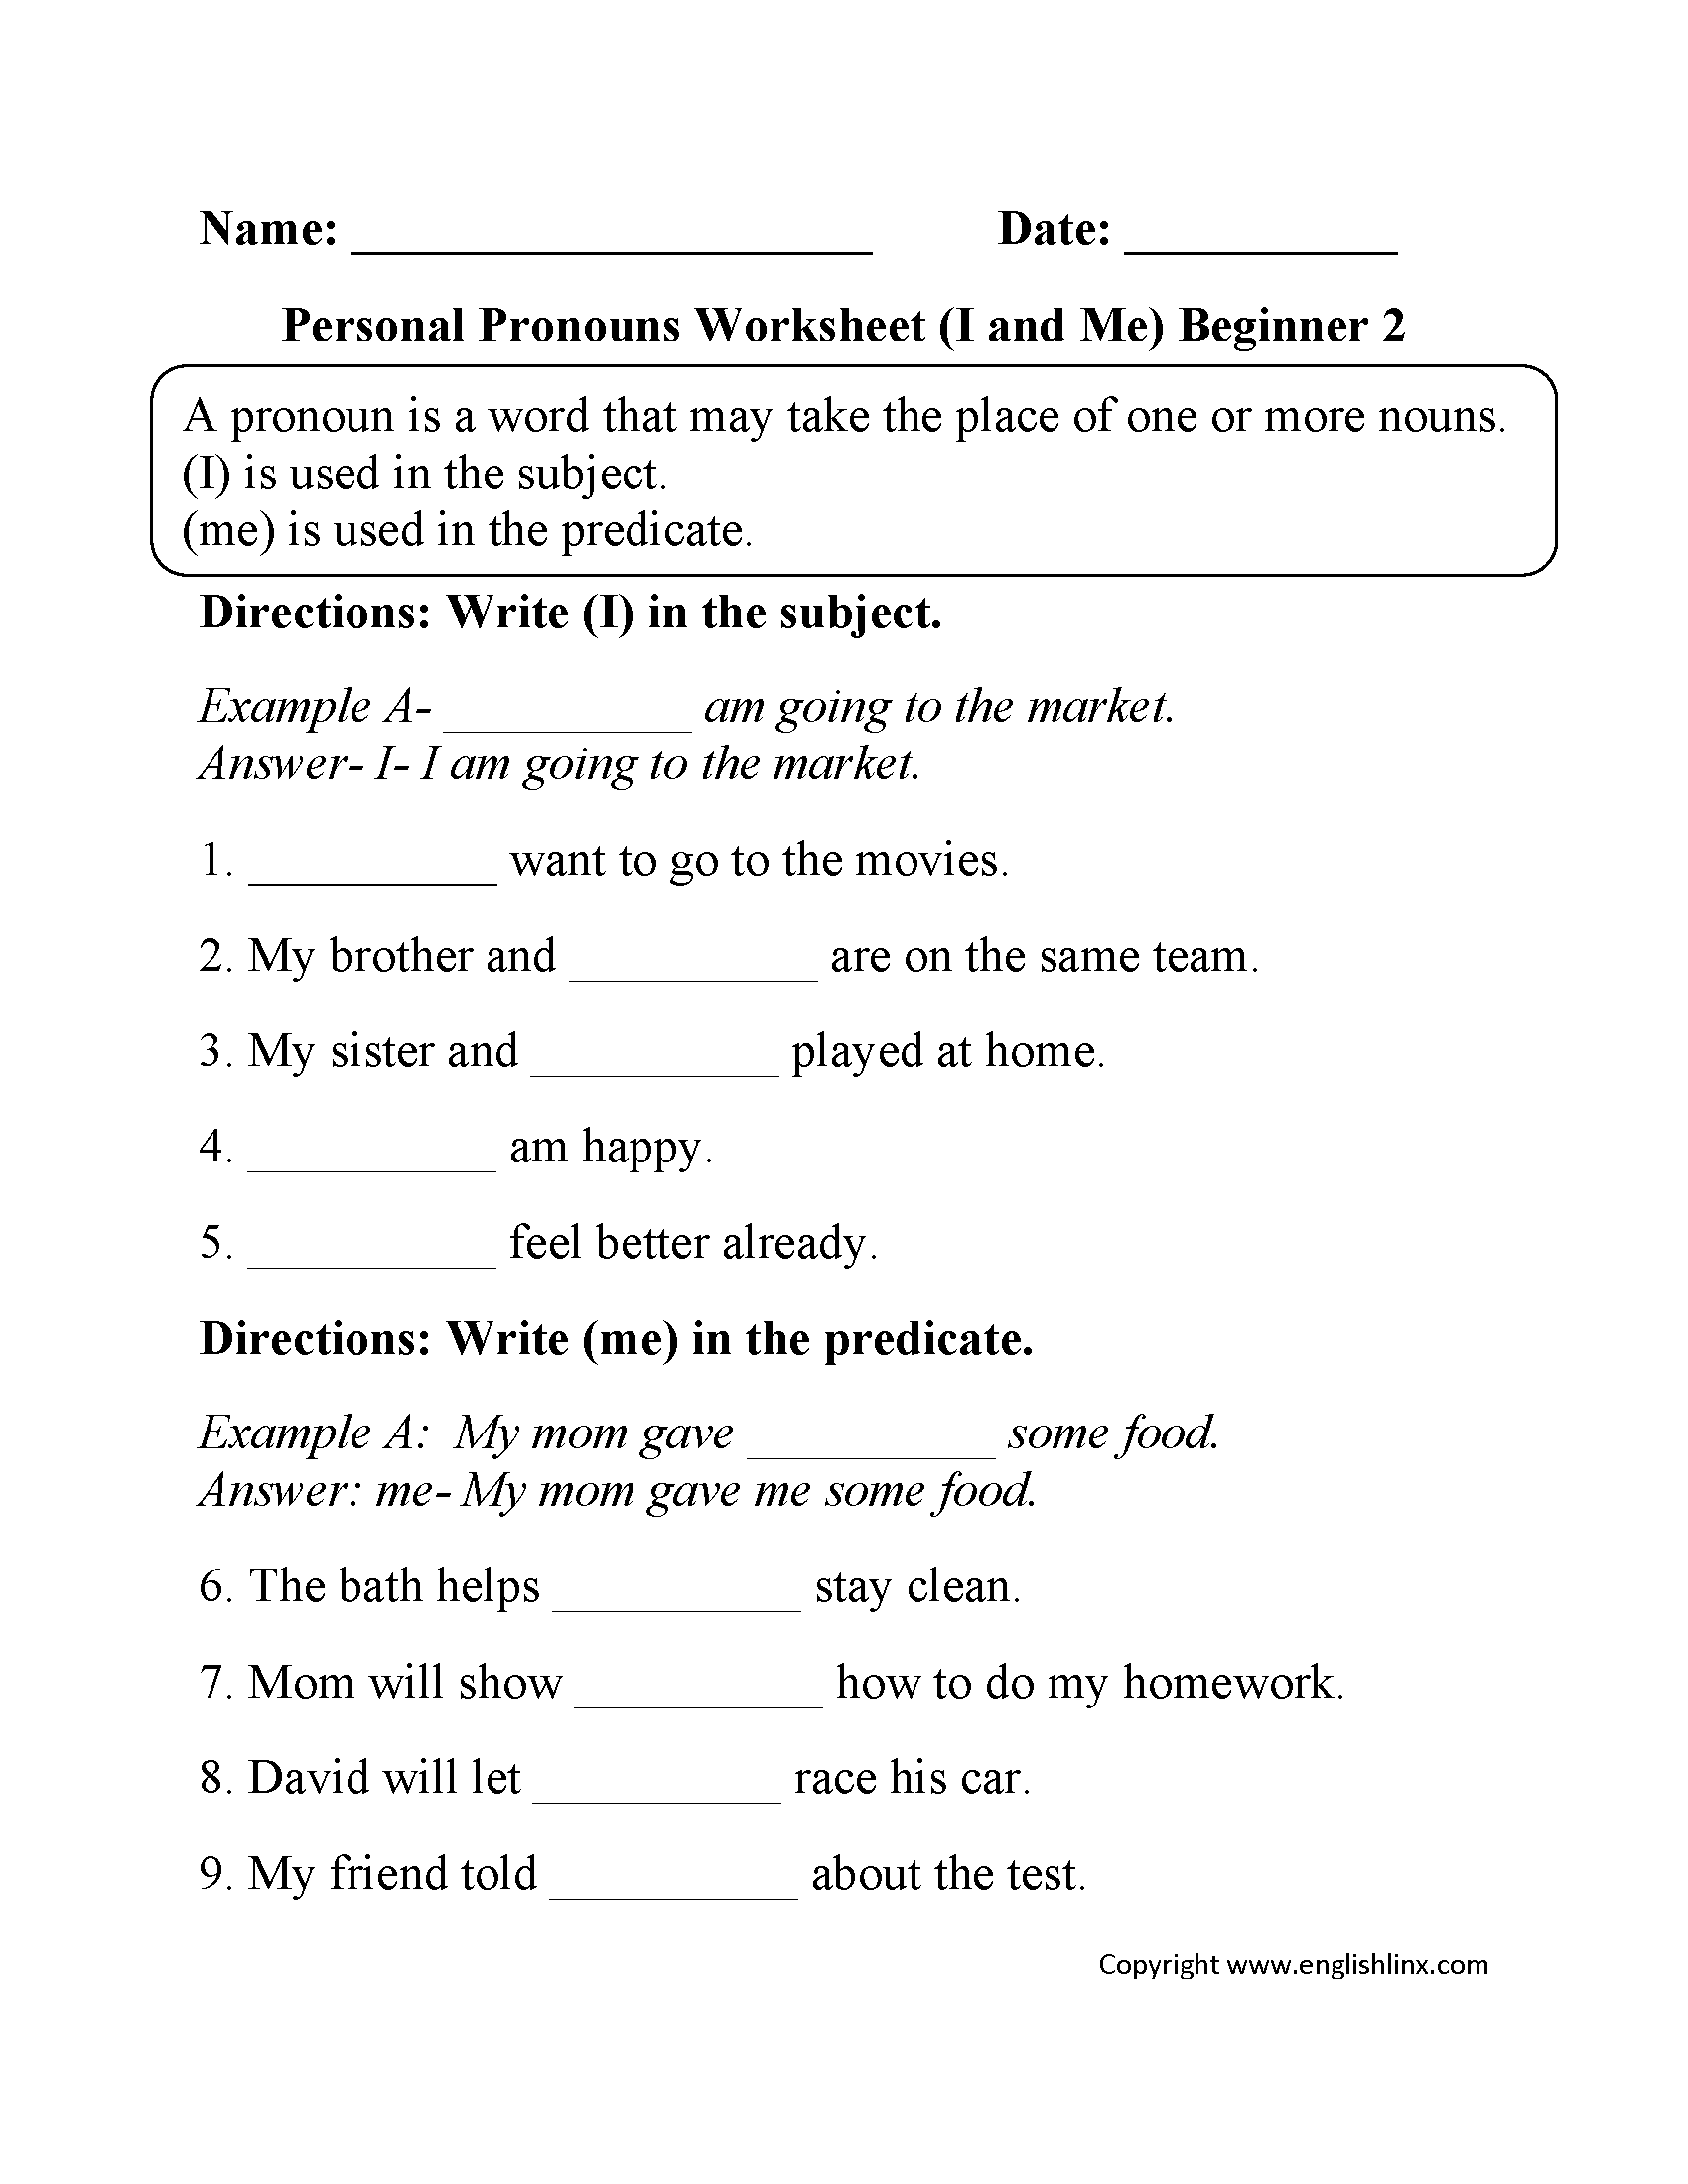 Personal Pronouns And Be Worksheet